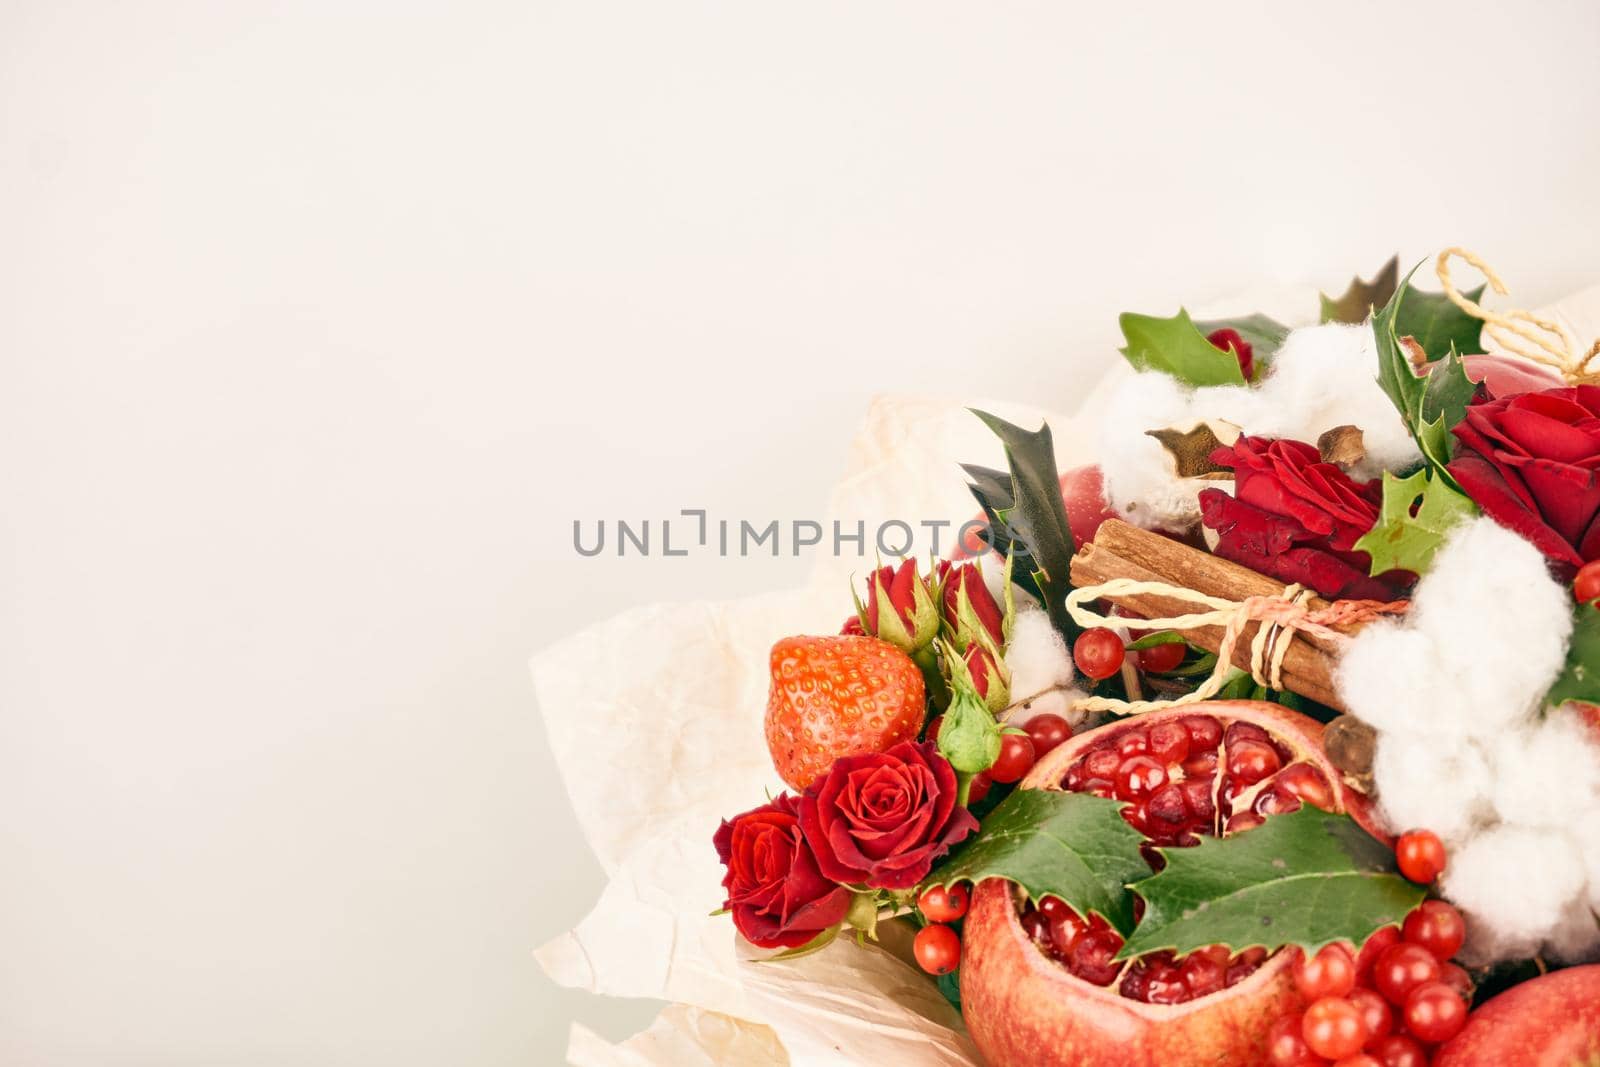 bouquet with red fruits cinnamon decoration gift organic. High quality photo